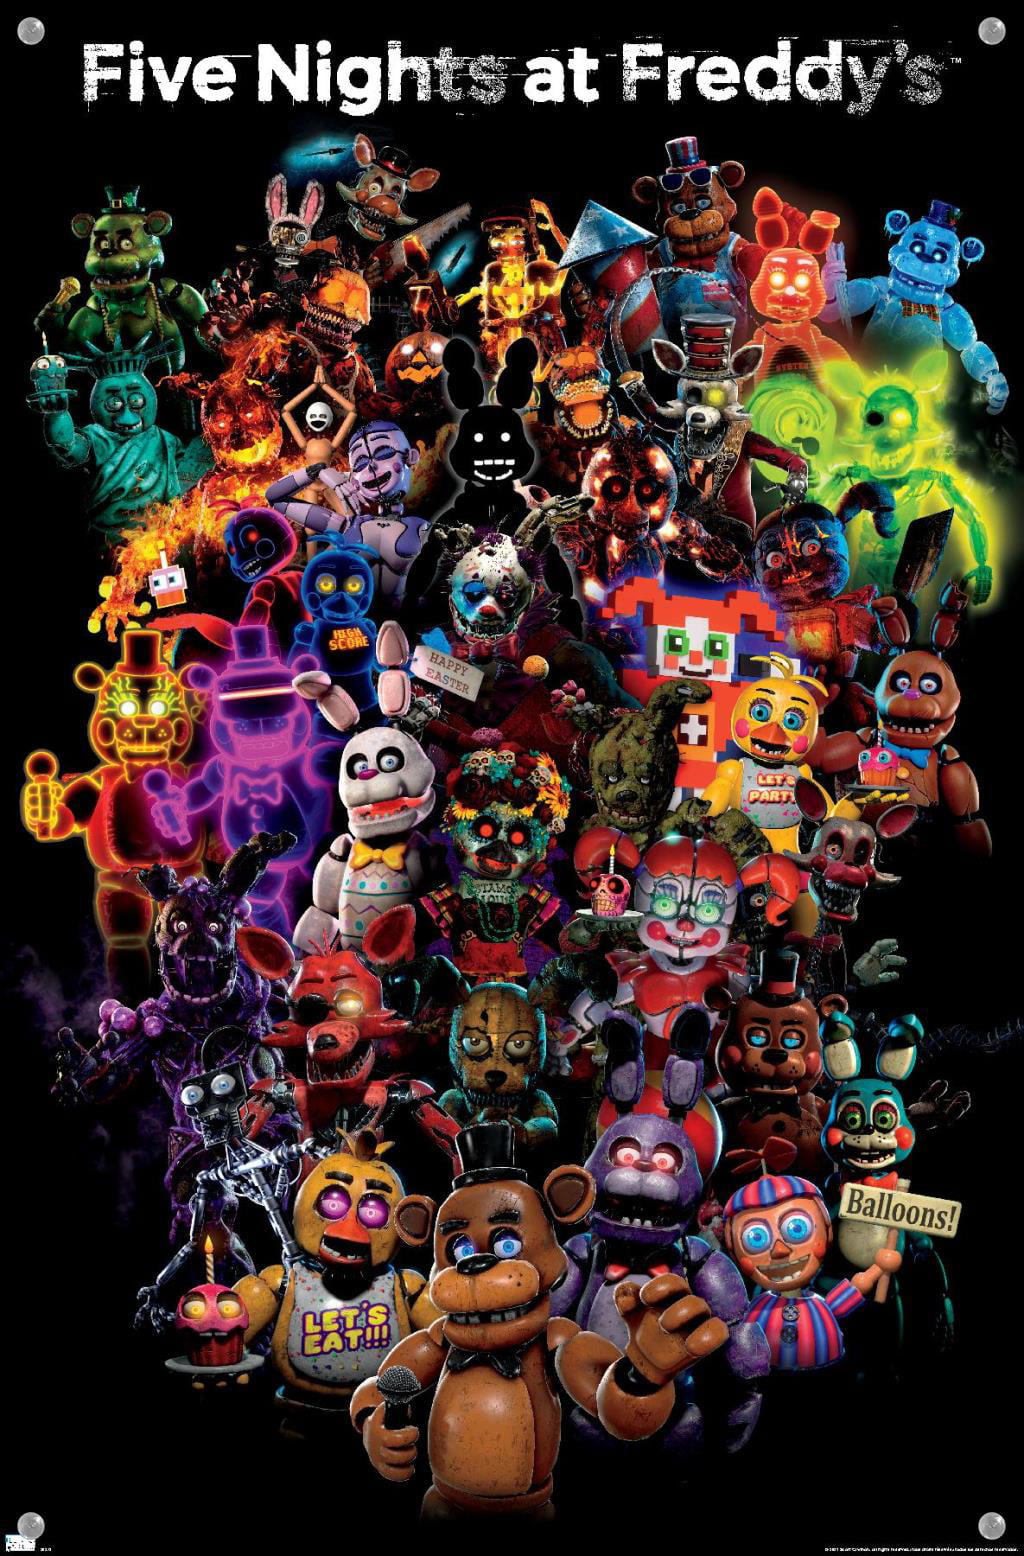  Trends International Five Nights at Freddy's Movie